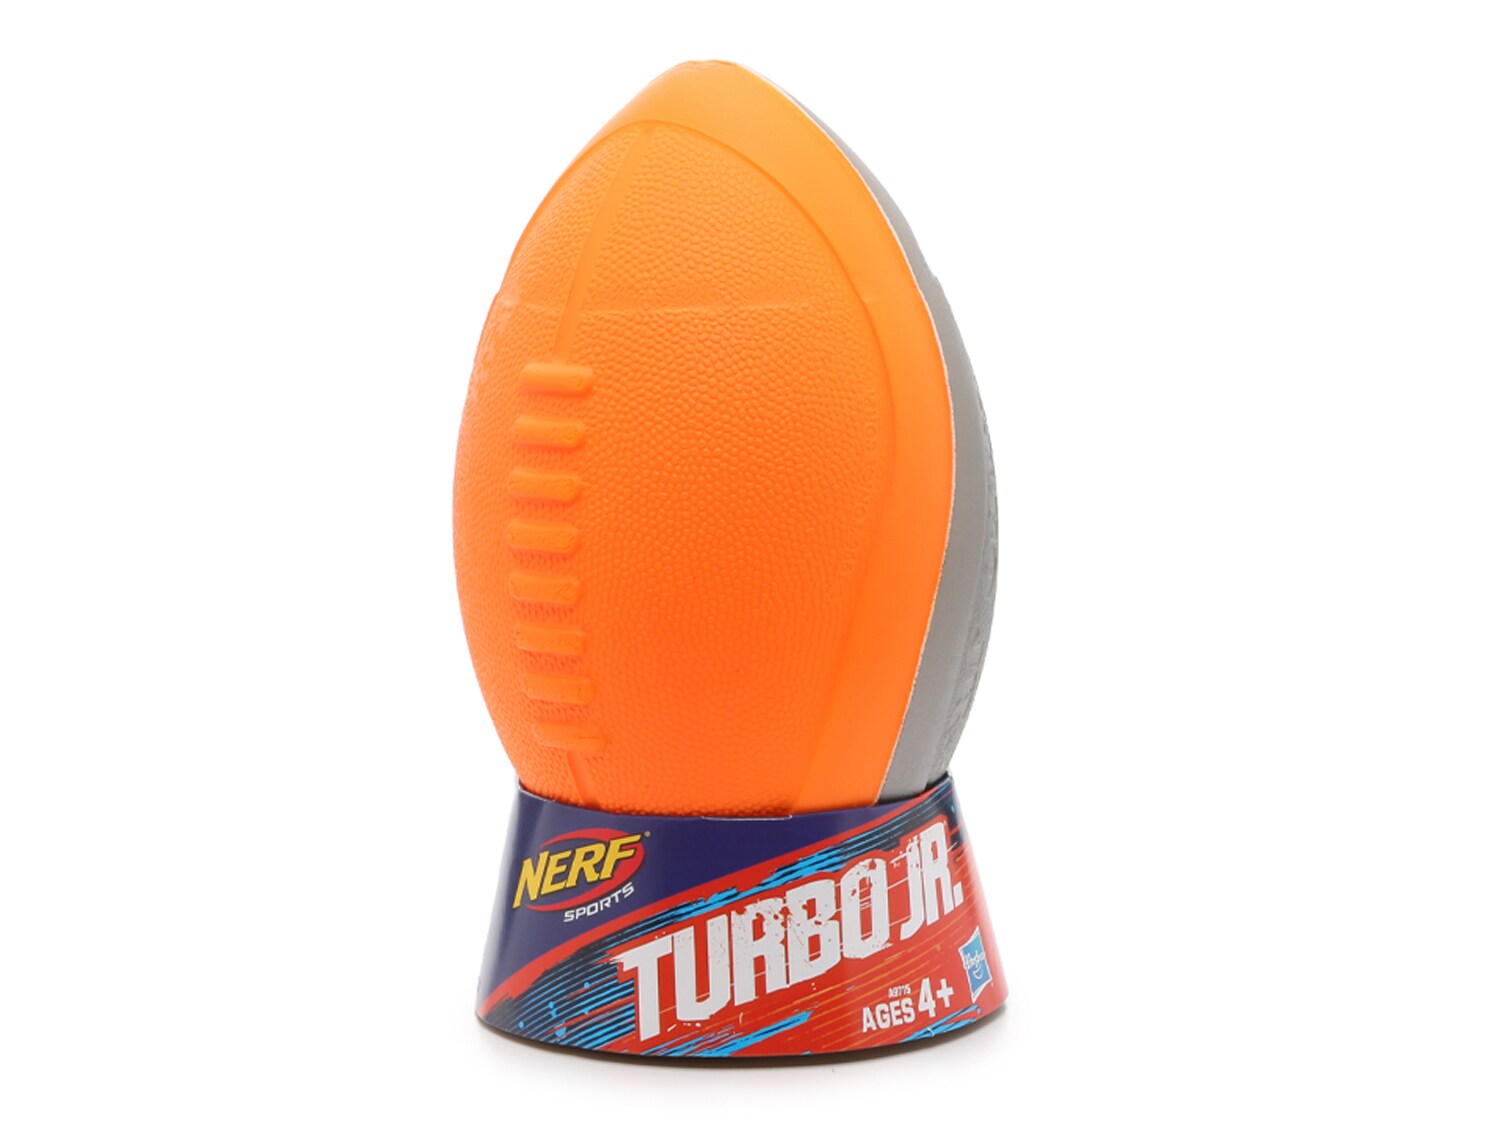 Football Orange Gray Sports Hasbro Ages 4+ Nerf Sports New in Package Turbo Jr 